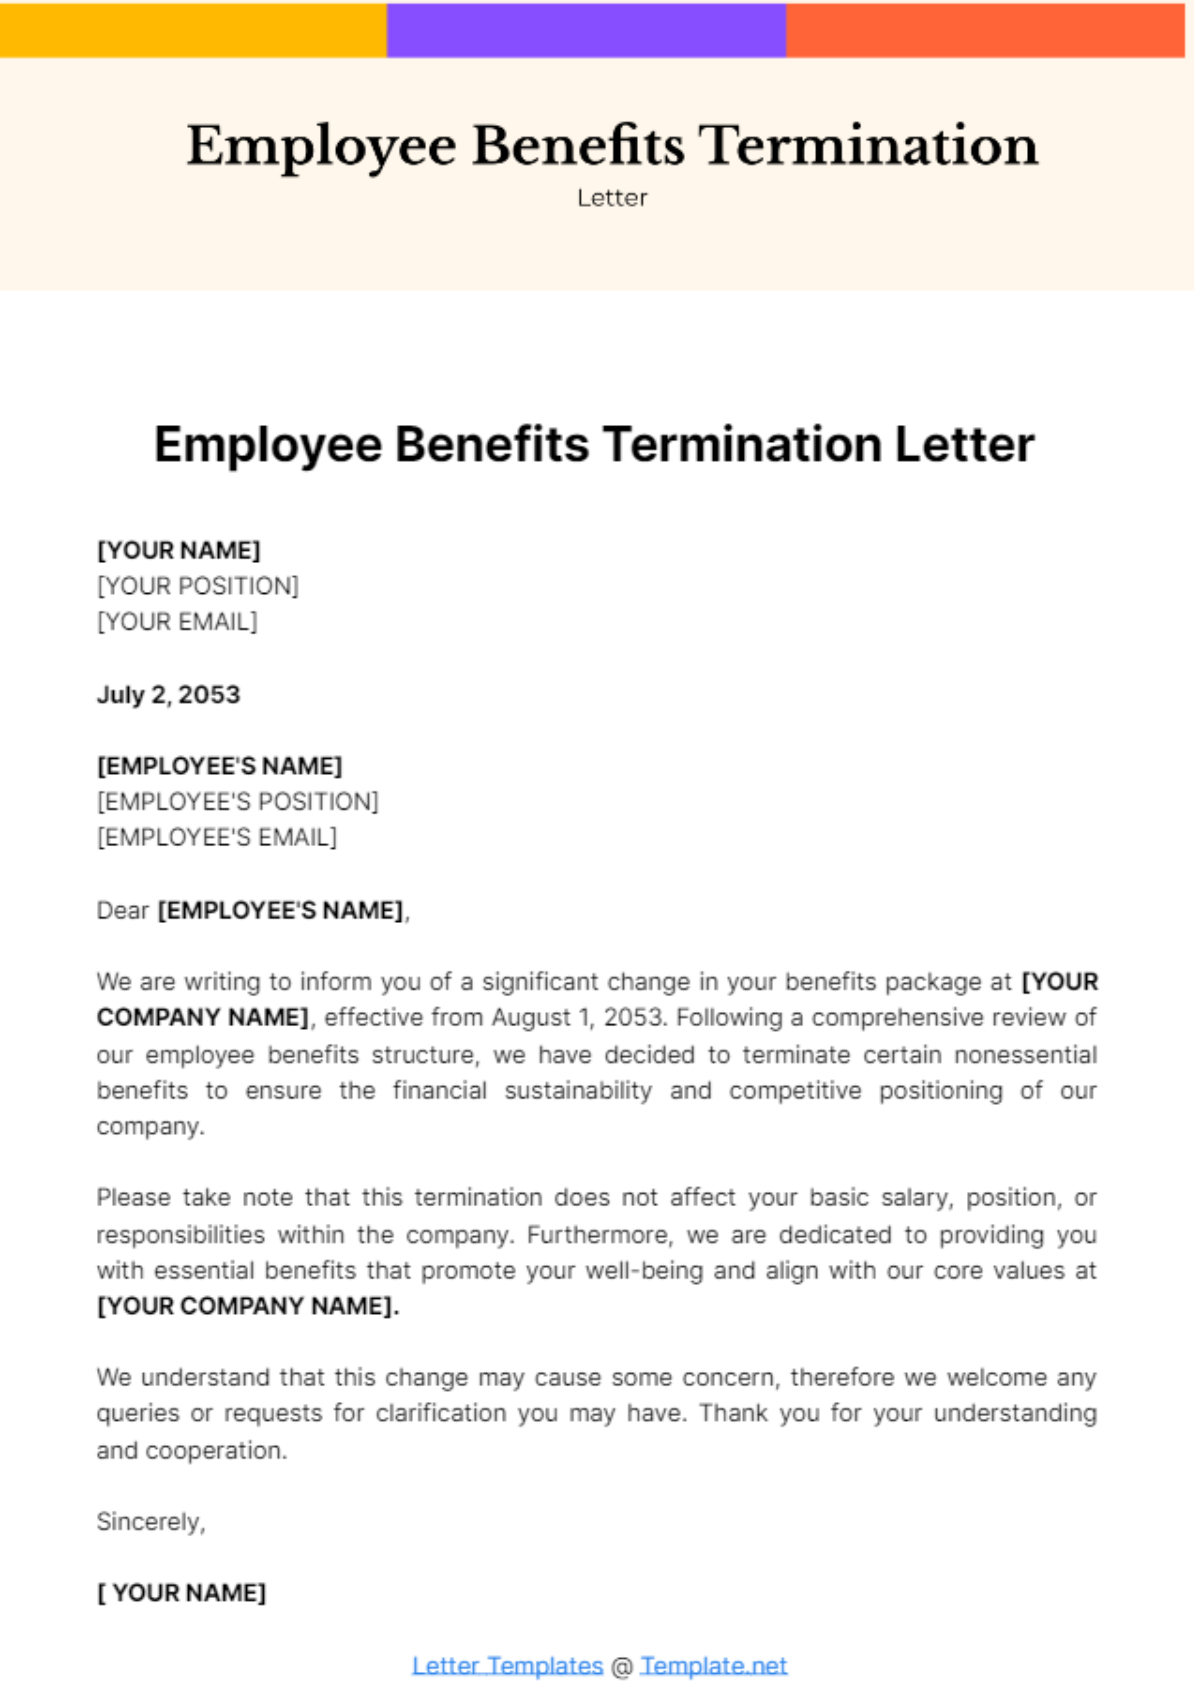 Free Employee Benefits Termination Letter Template